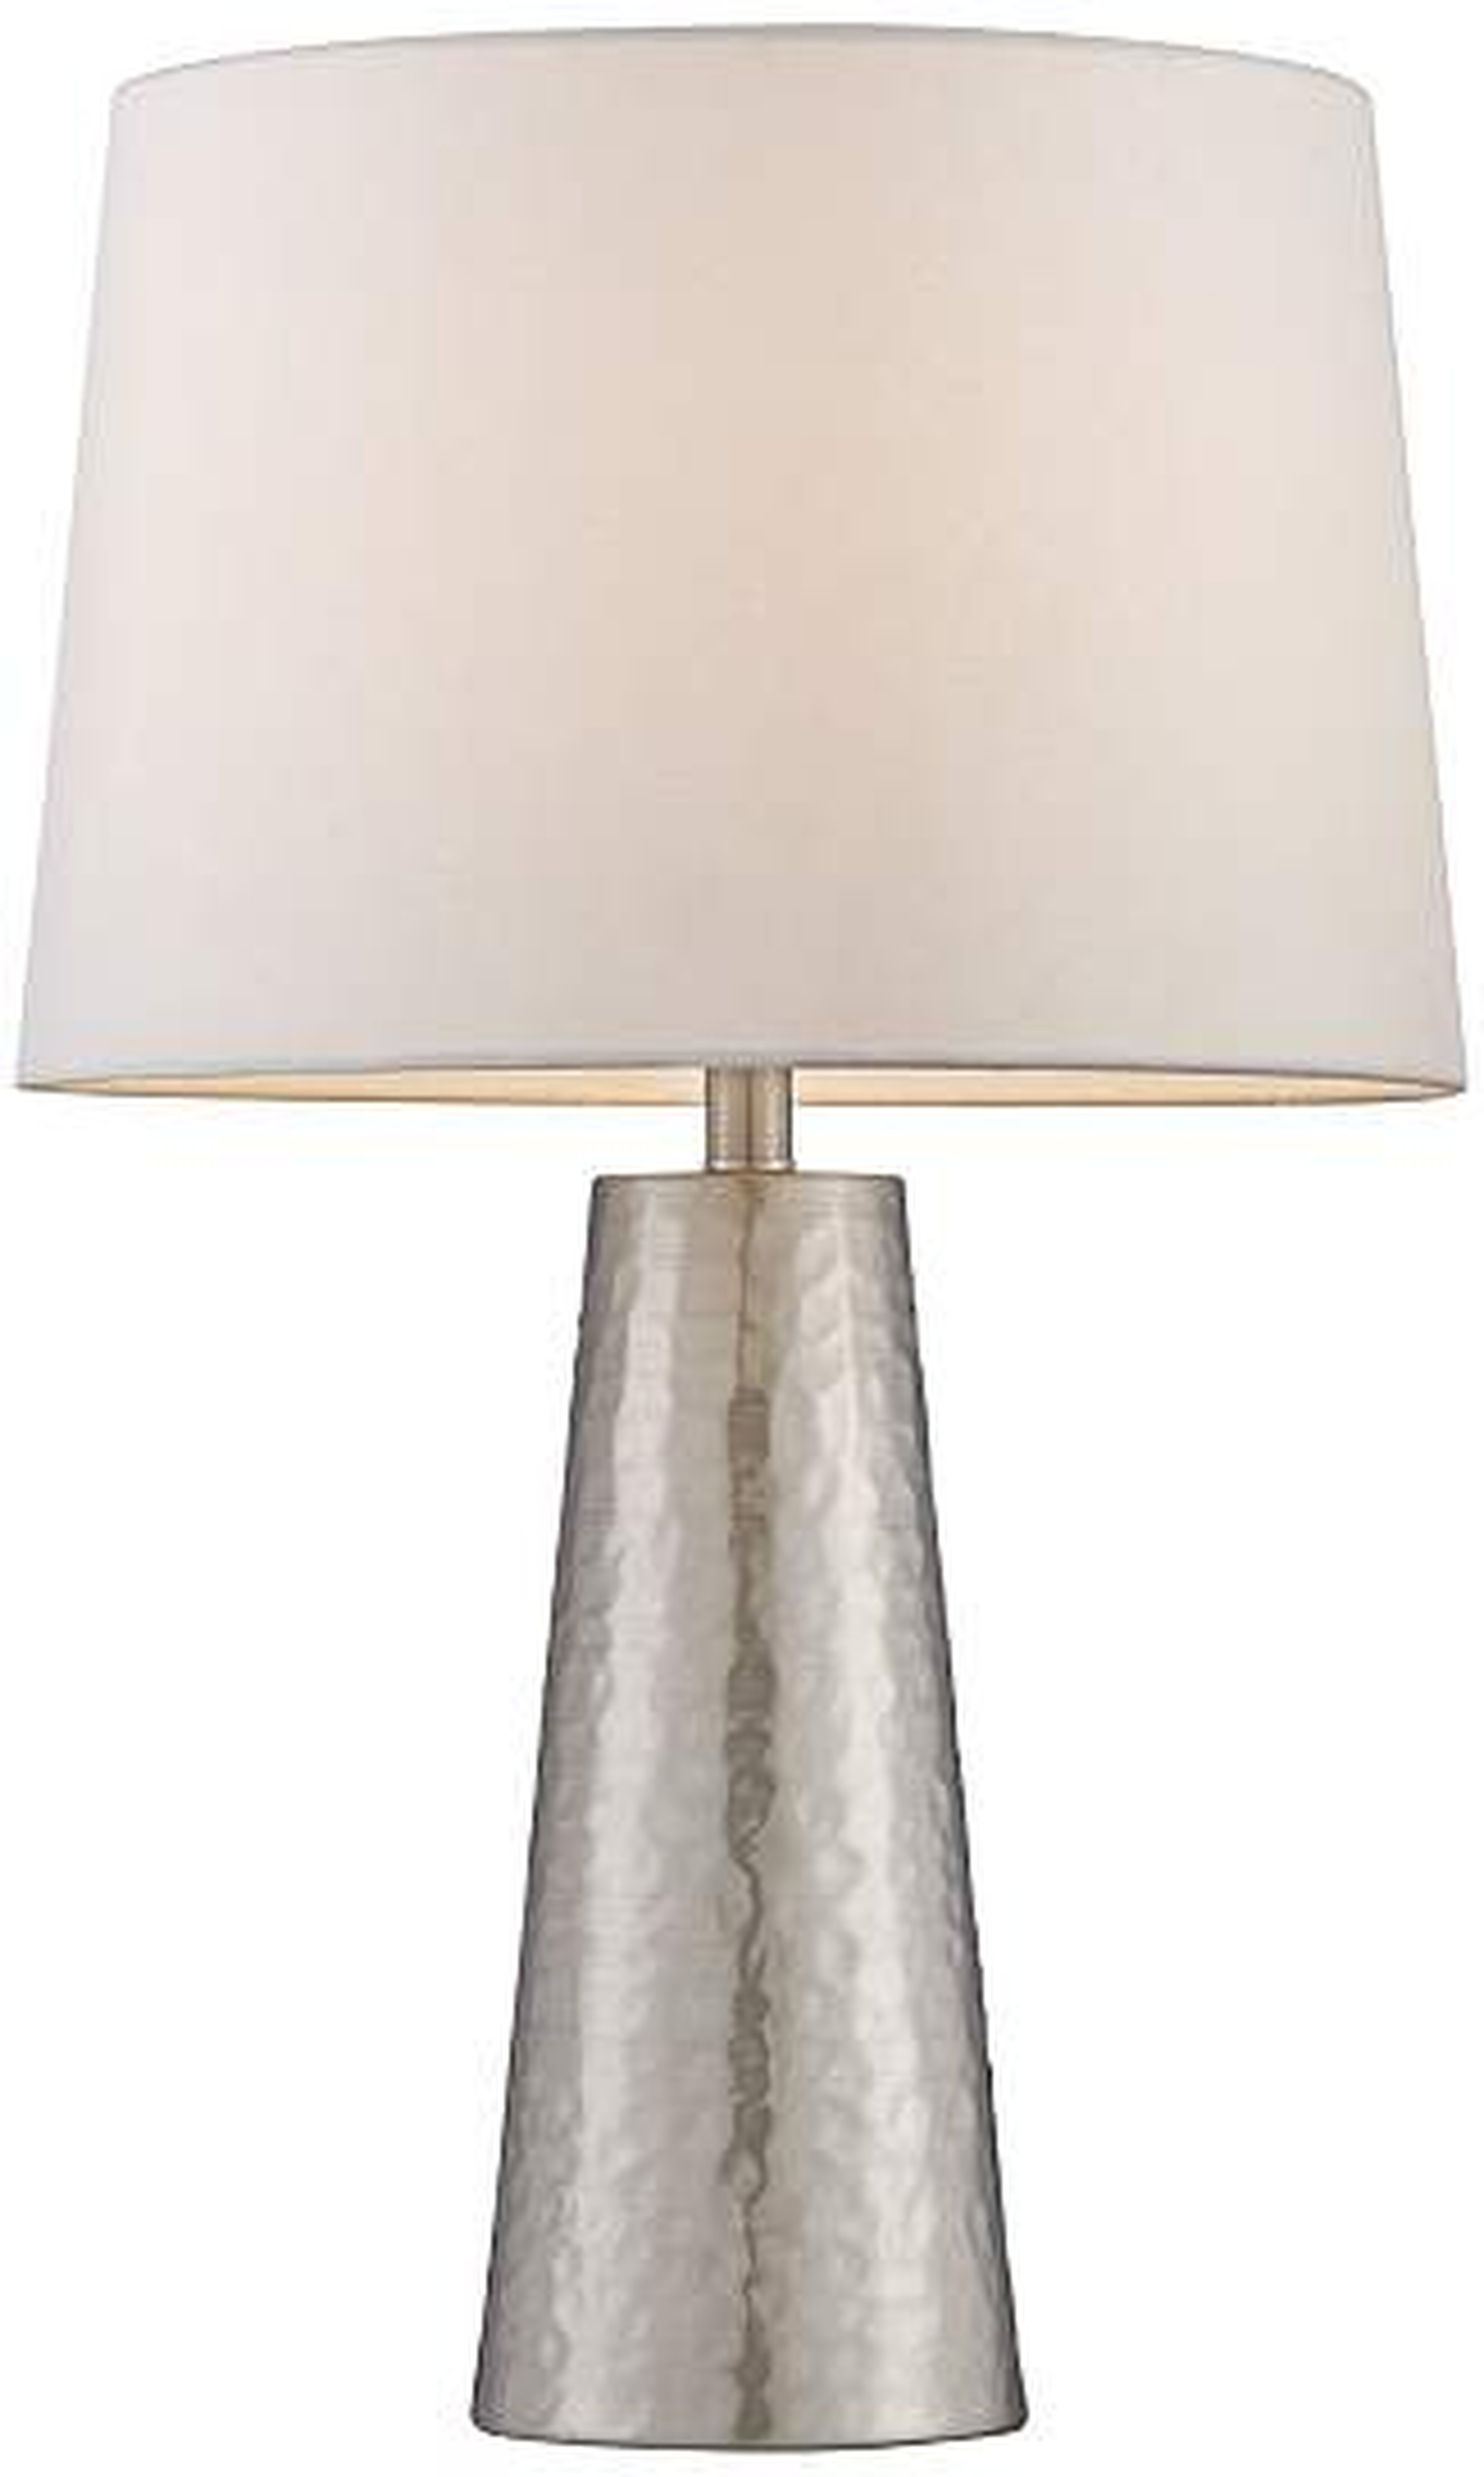 Hammered Metal Cylinder Table Lamp - Lamps Plus